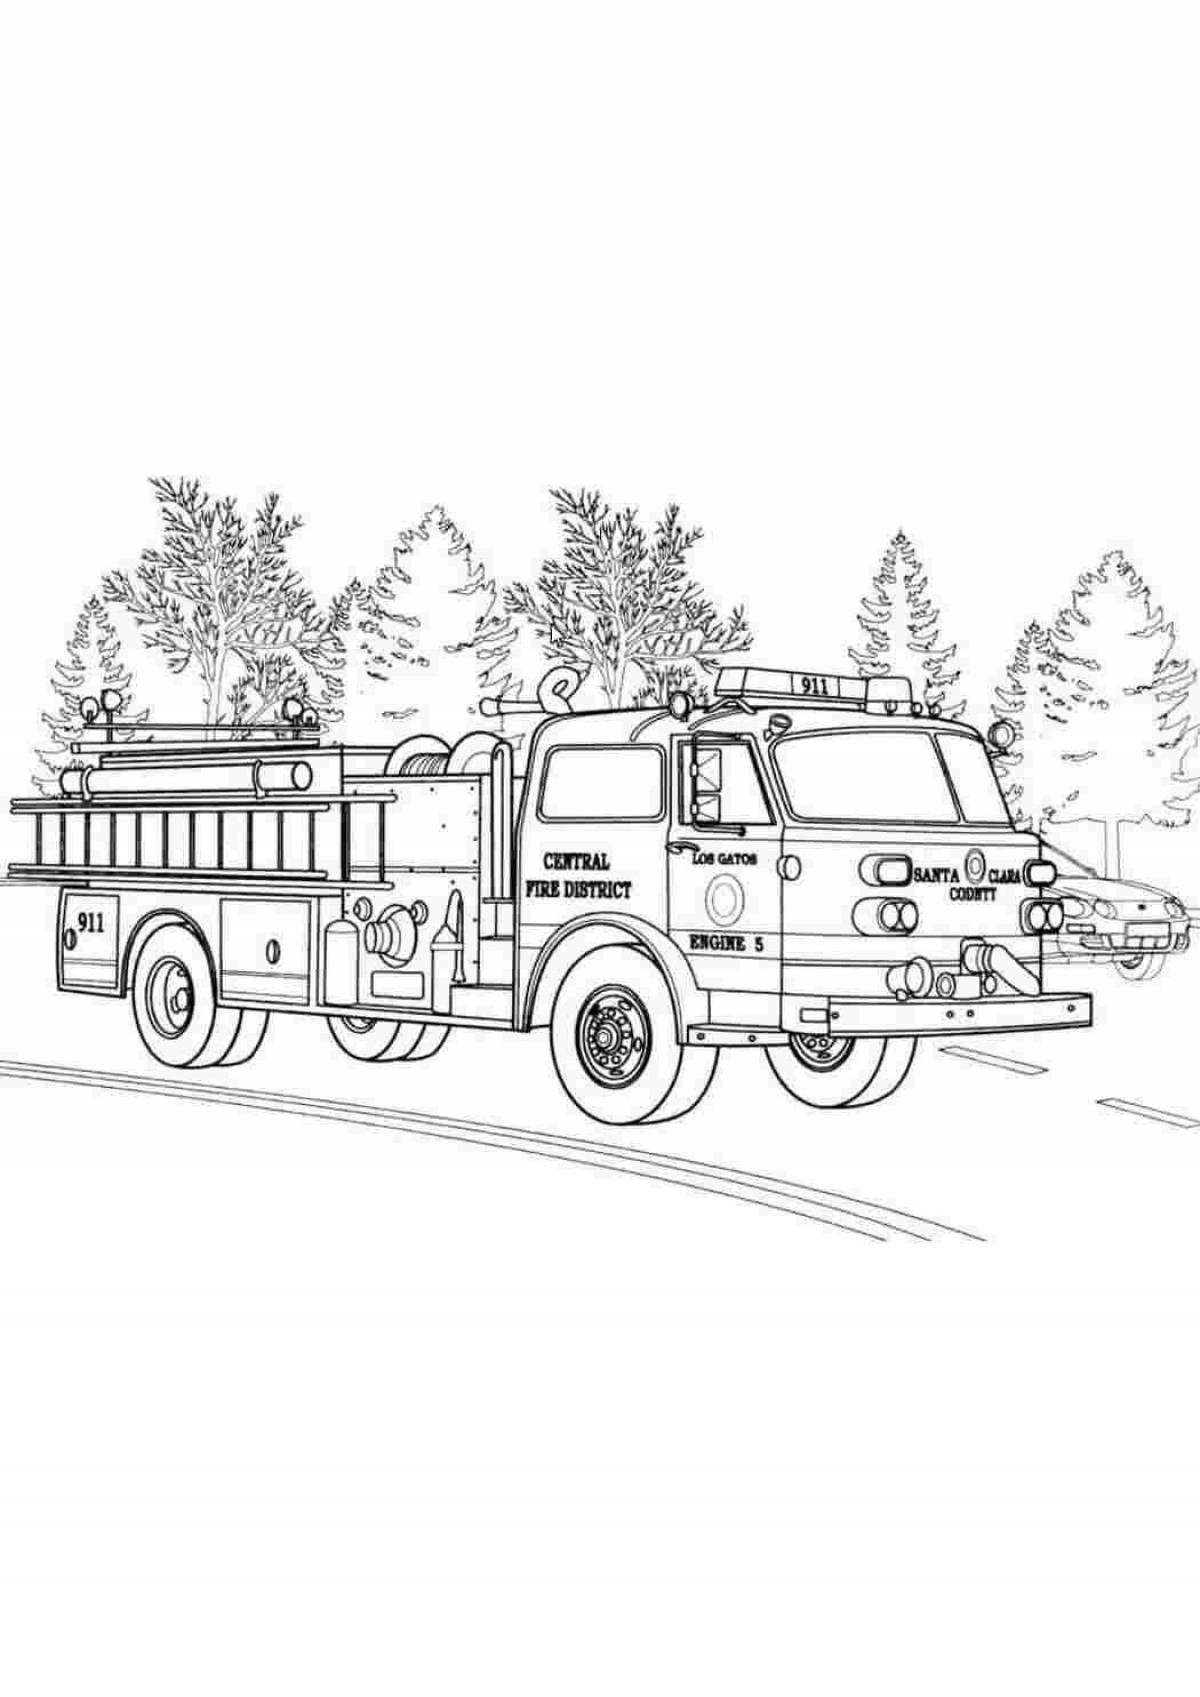 Fairy boys fire truck coloring page